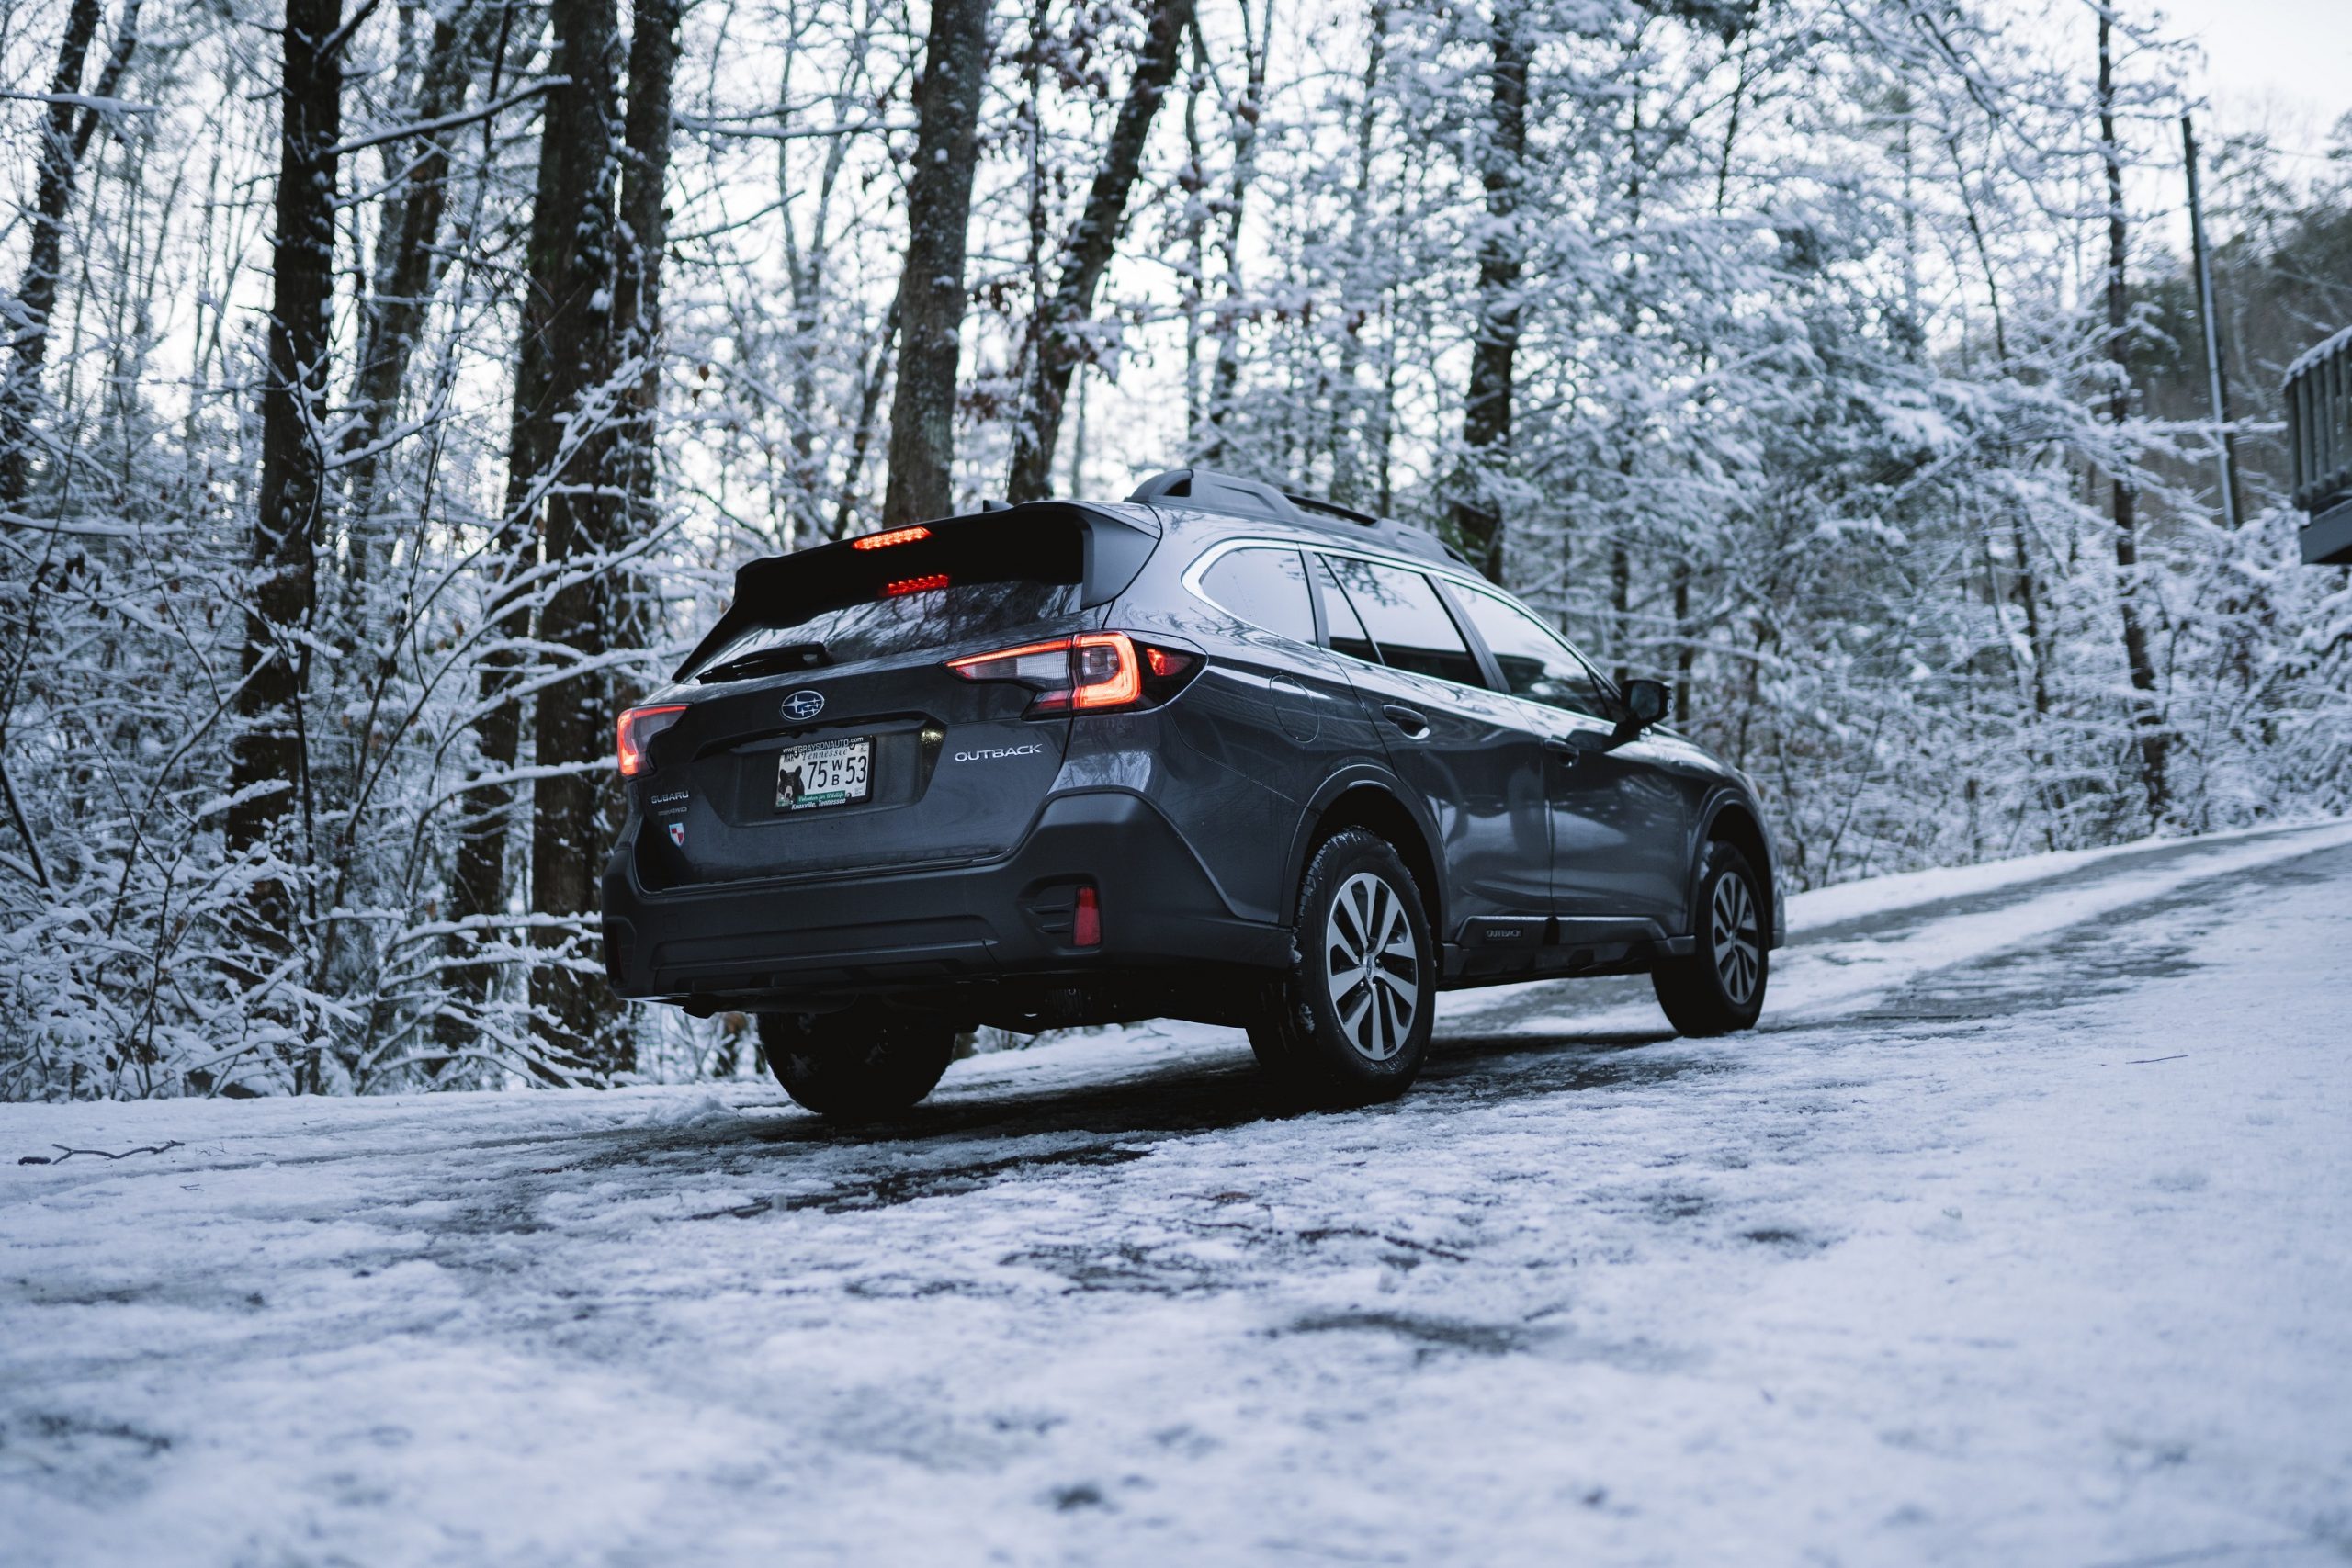 A Subaru Outback wagon shot from the rear on a snowy trail